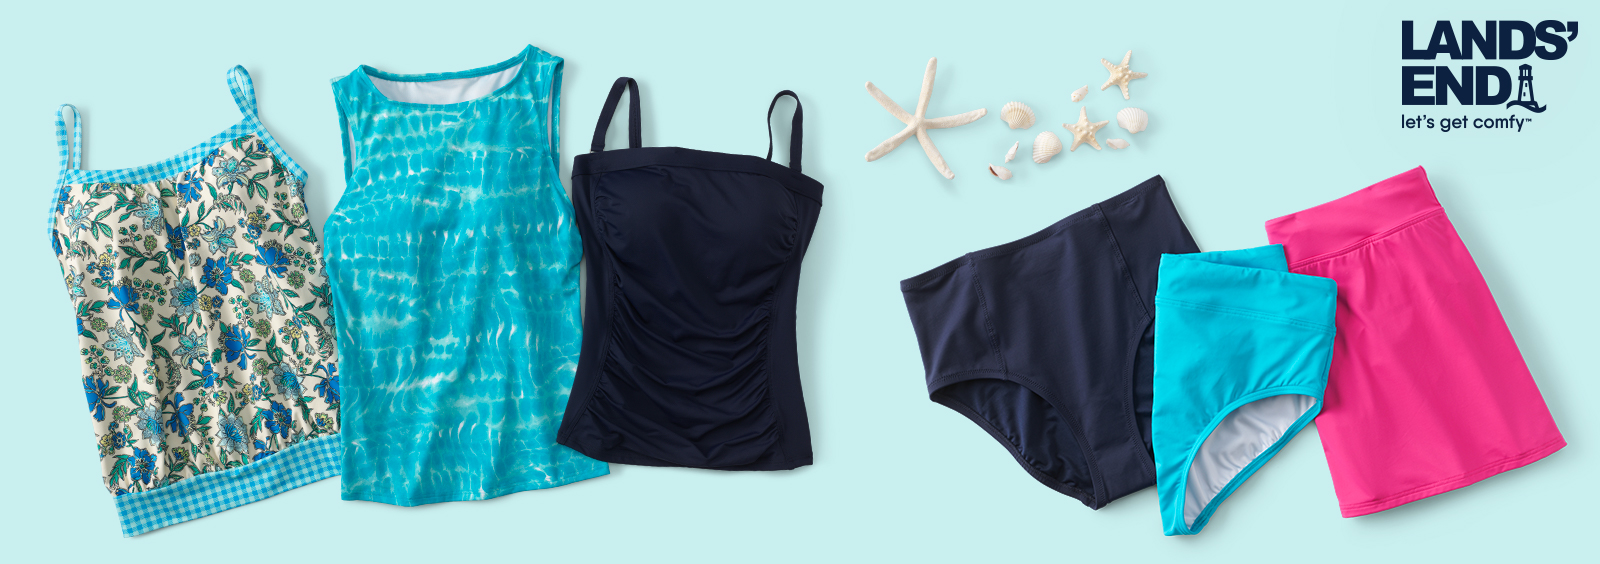 4 Tips to Feeling Confident in Your Swimwear